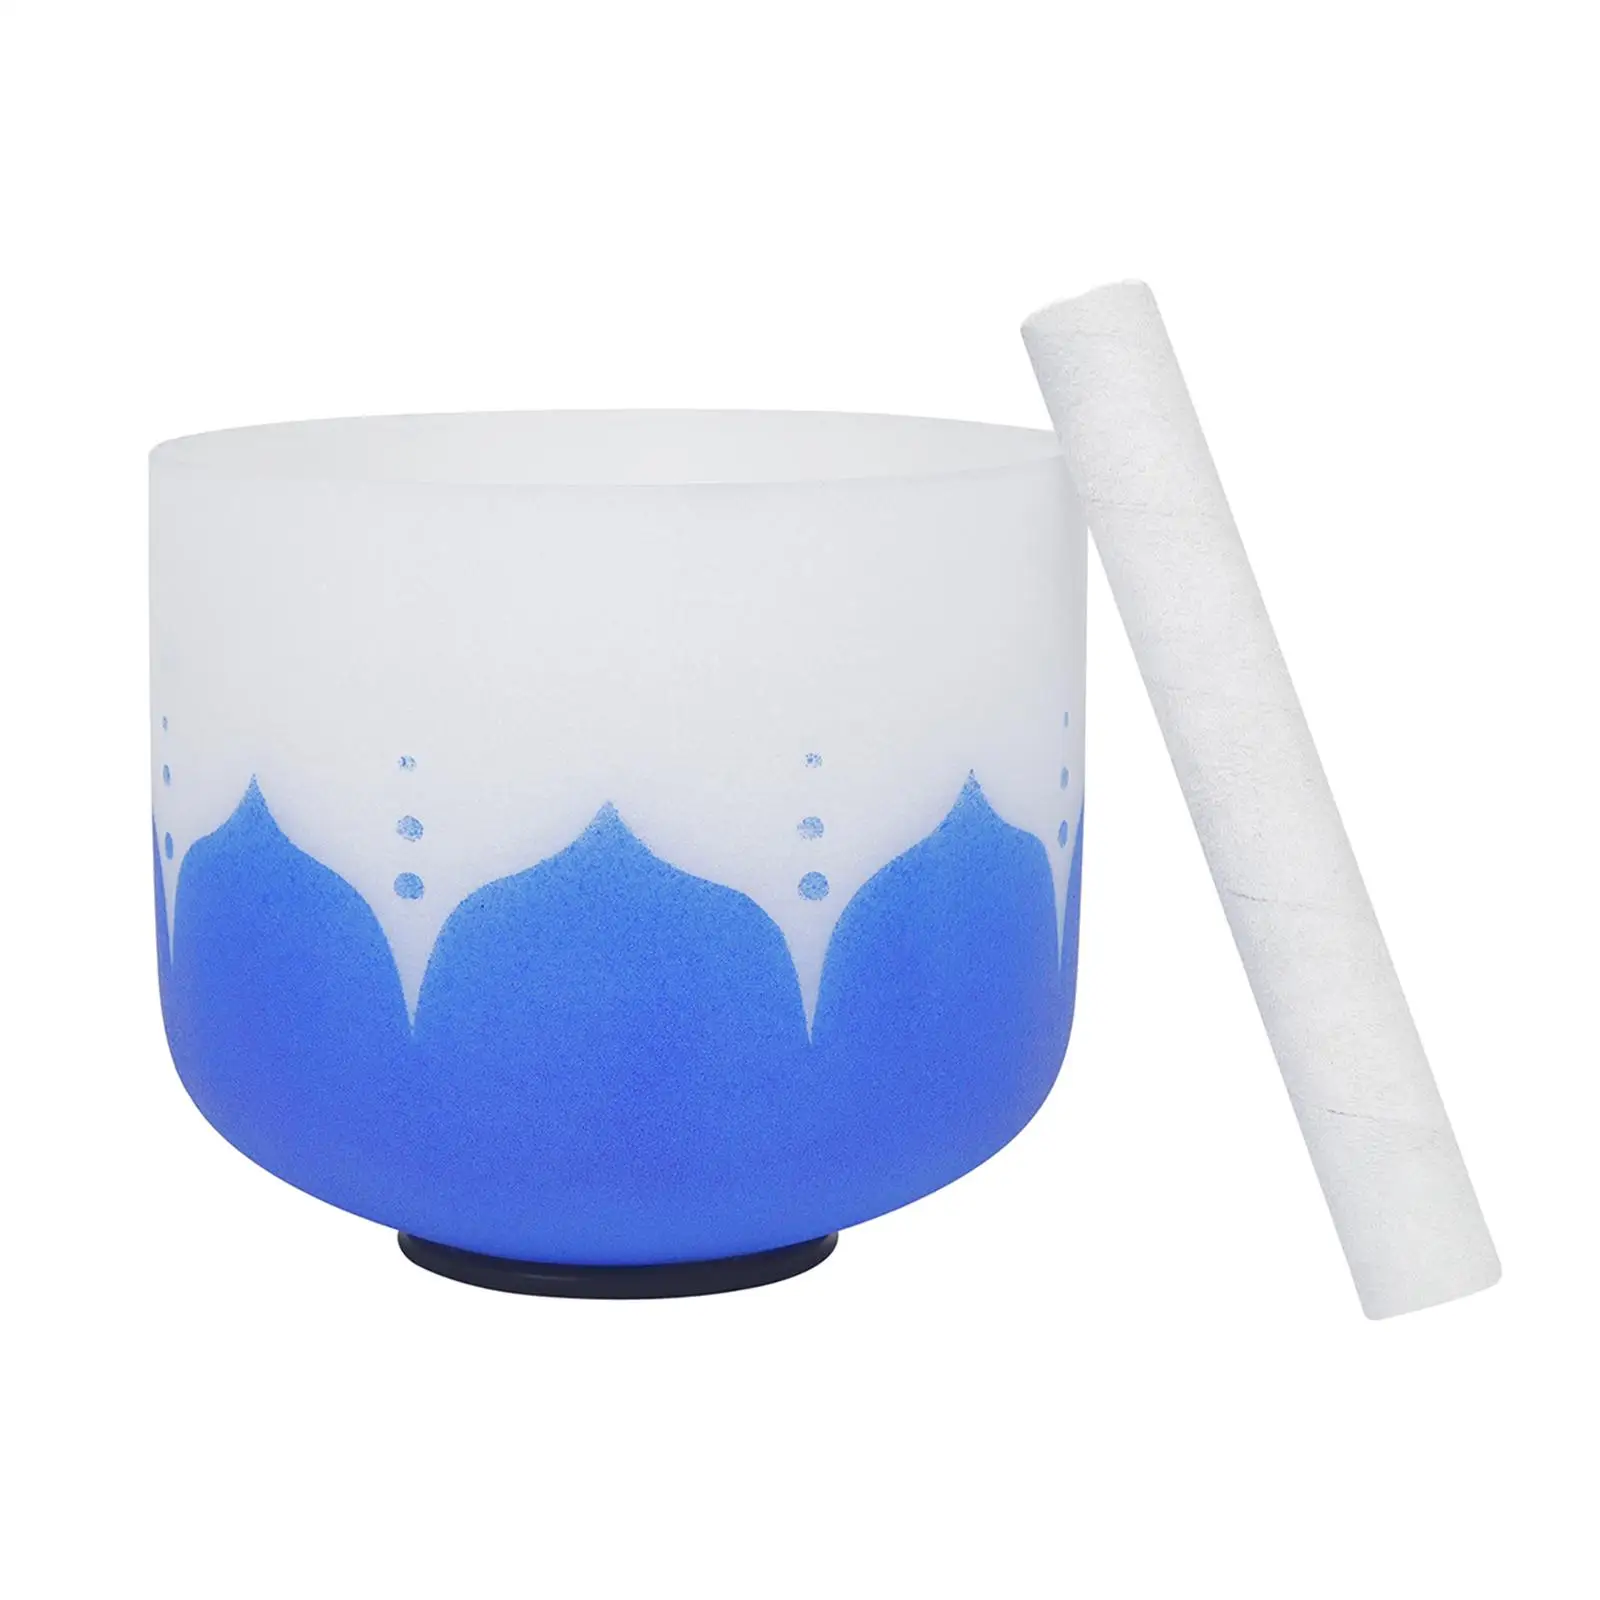 Creative Singing Bowls with Mallet Craft Musical Instrument for Meditation Fireplace Tabletop